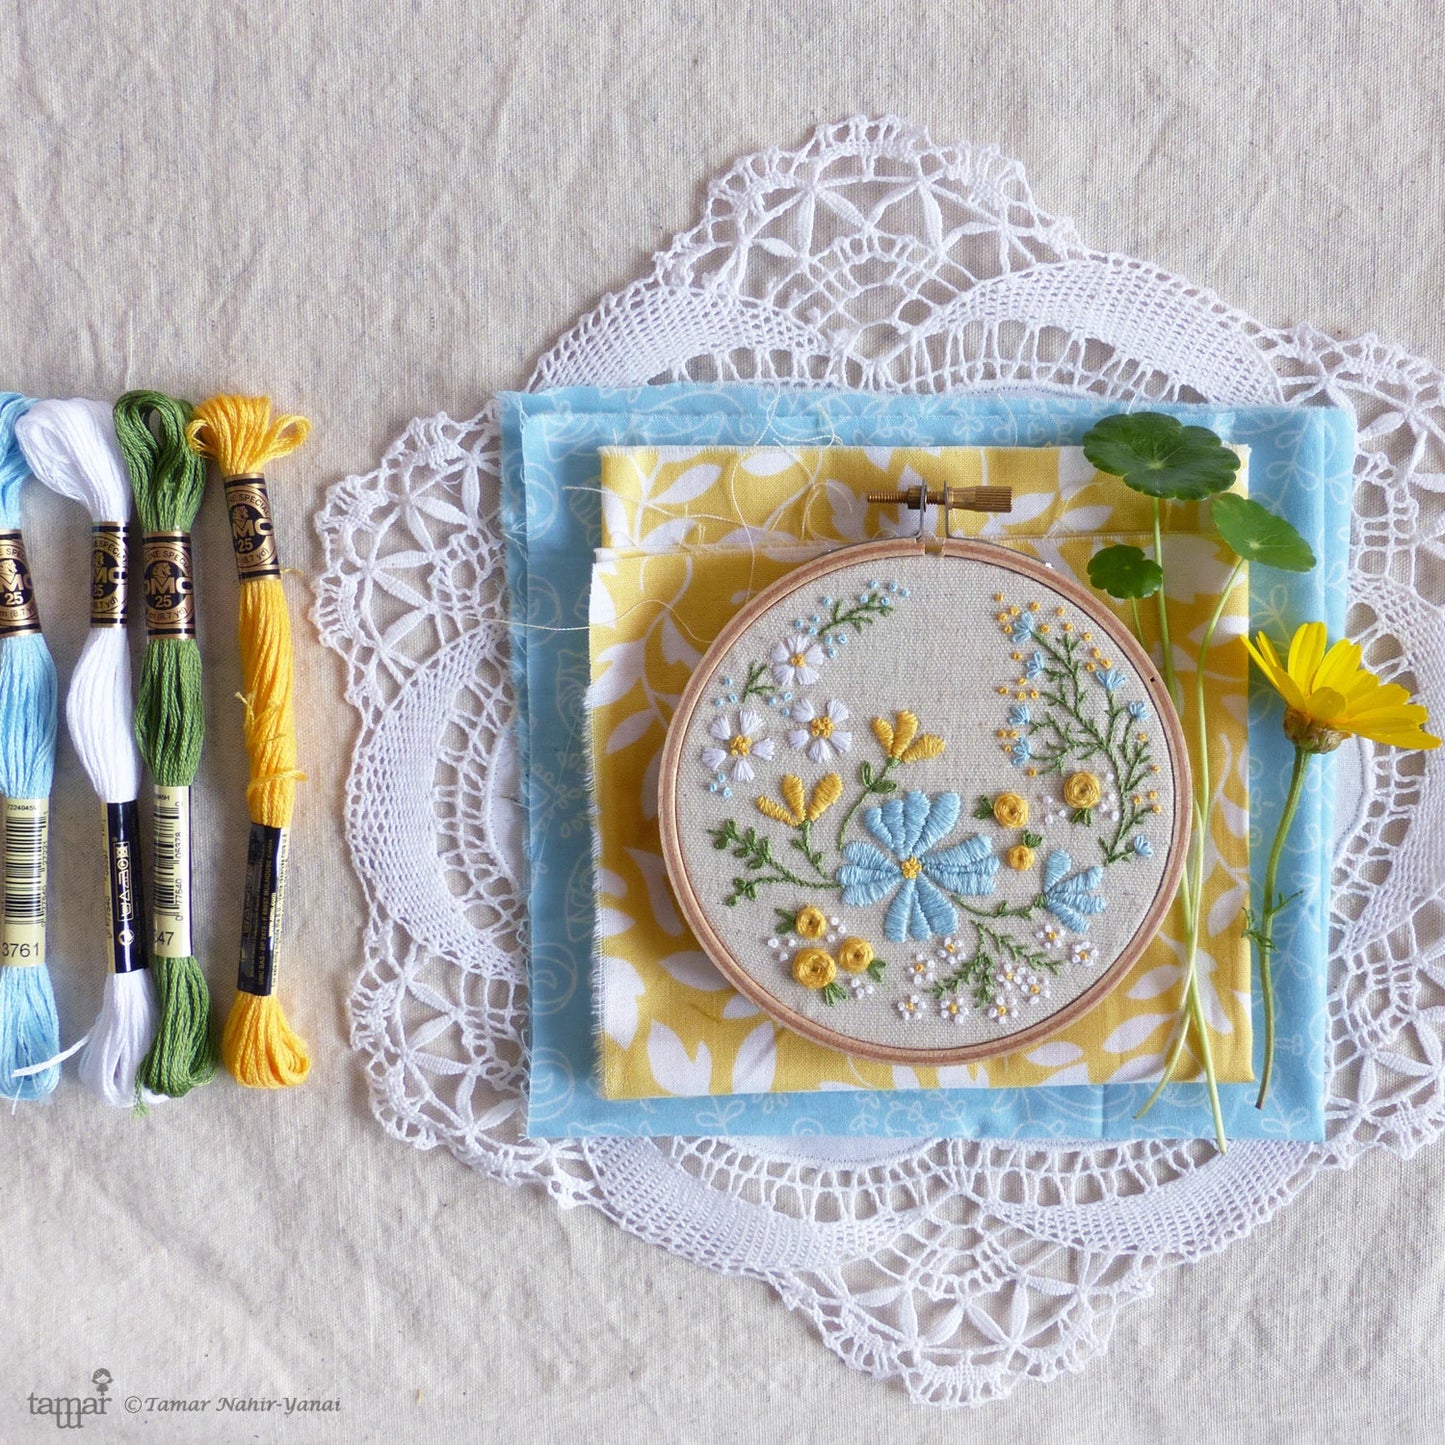 Blossoming Garden embroidery kit